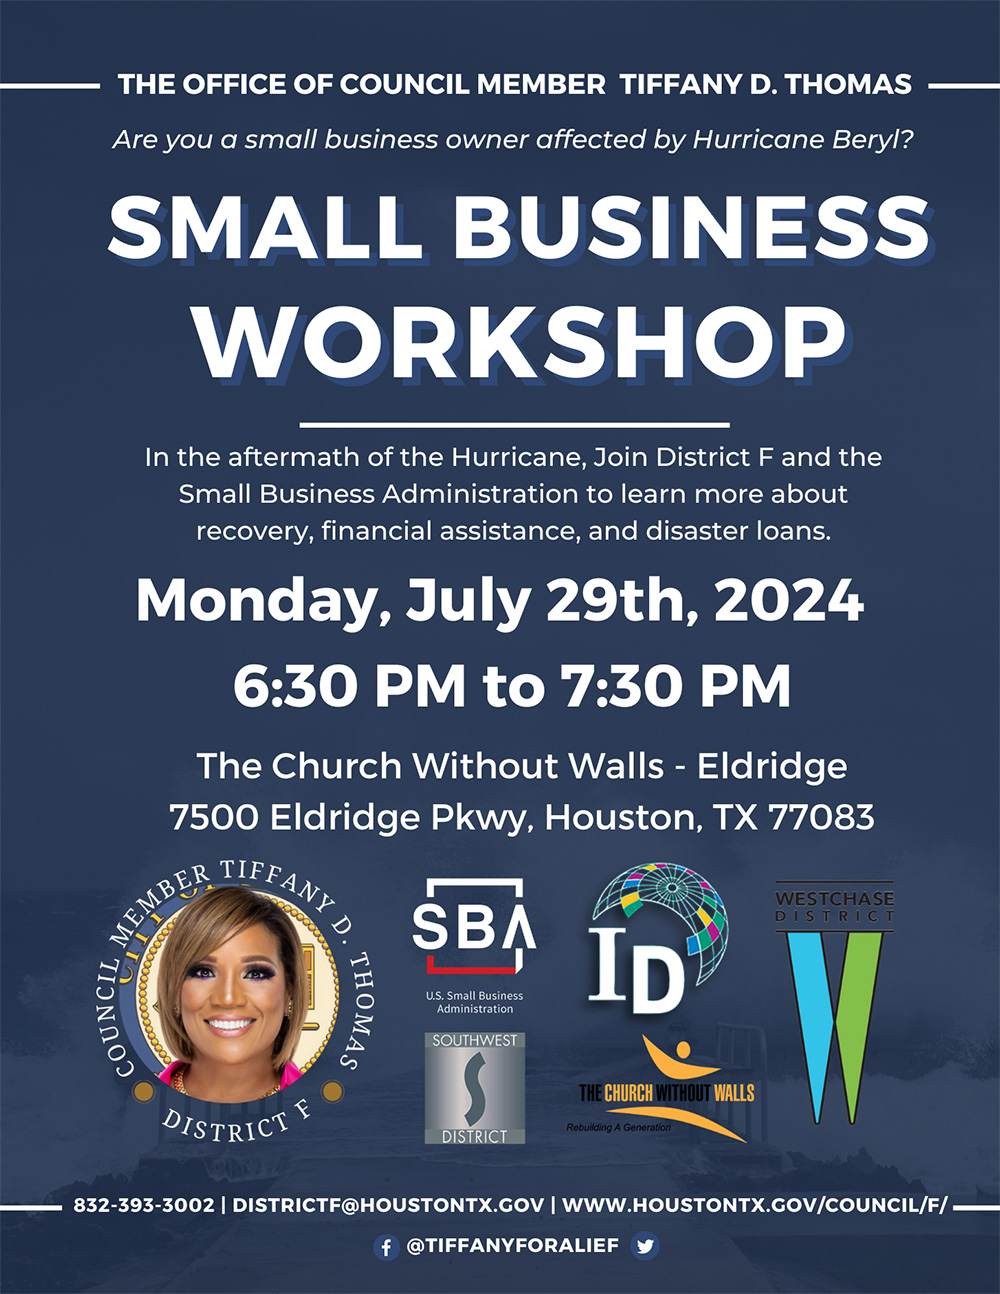 Featured image for “SBA Workshop on Monday, July 29”